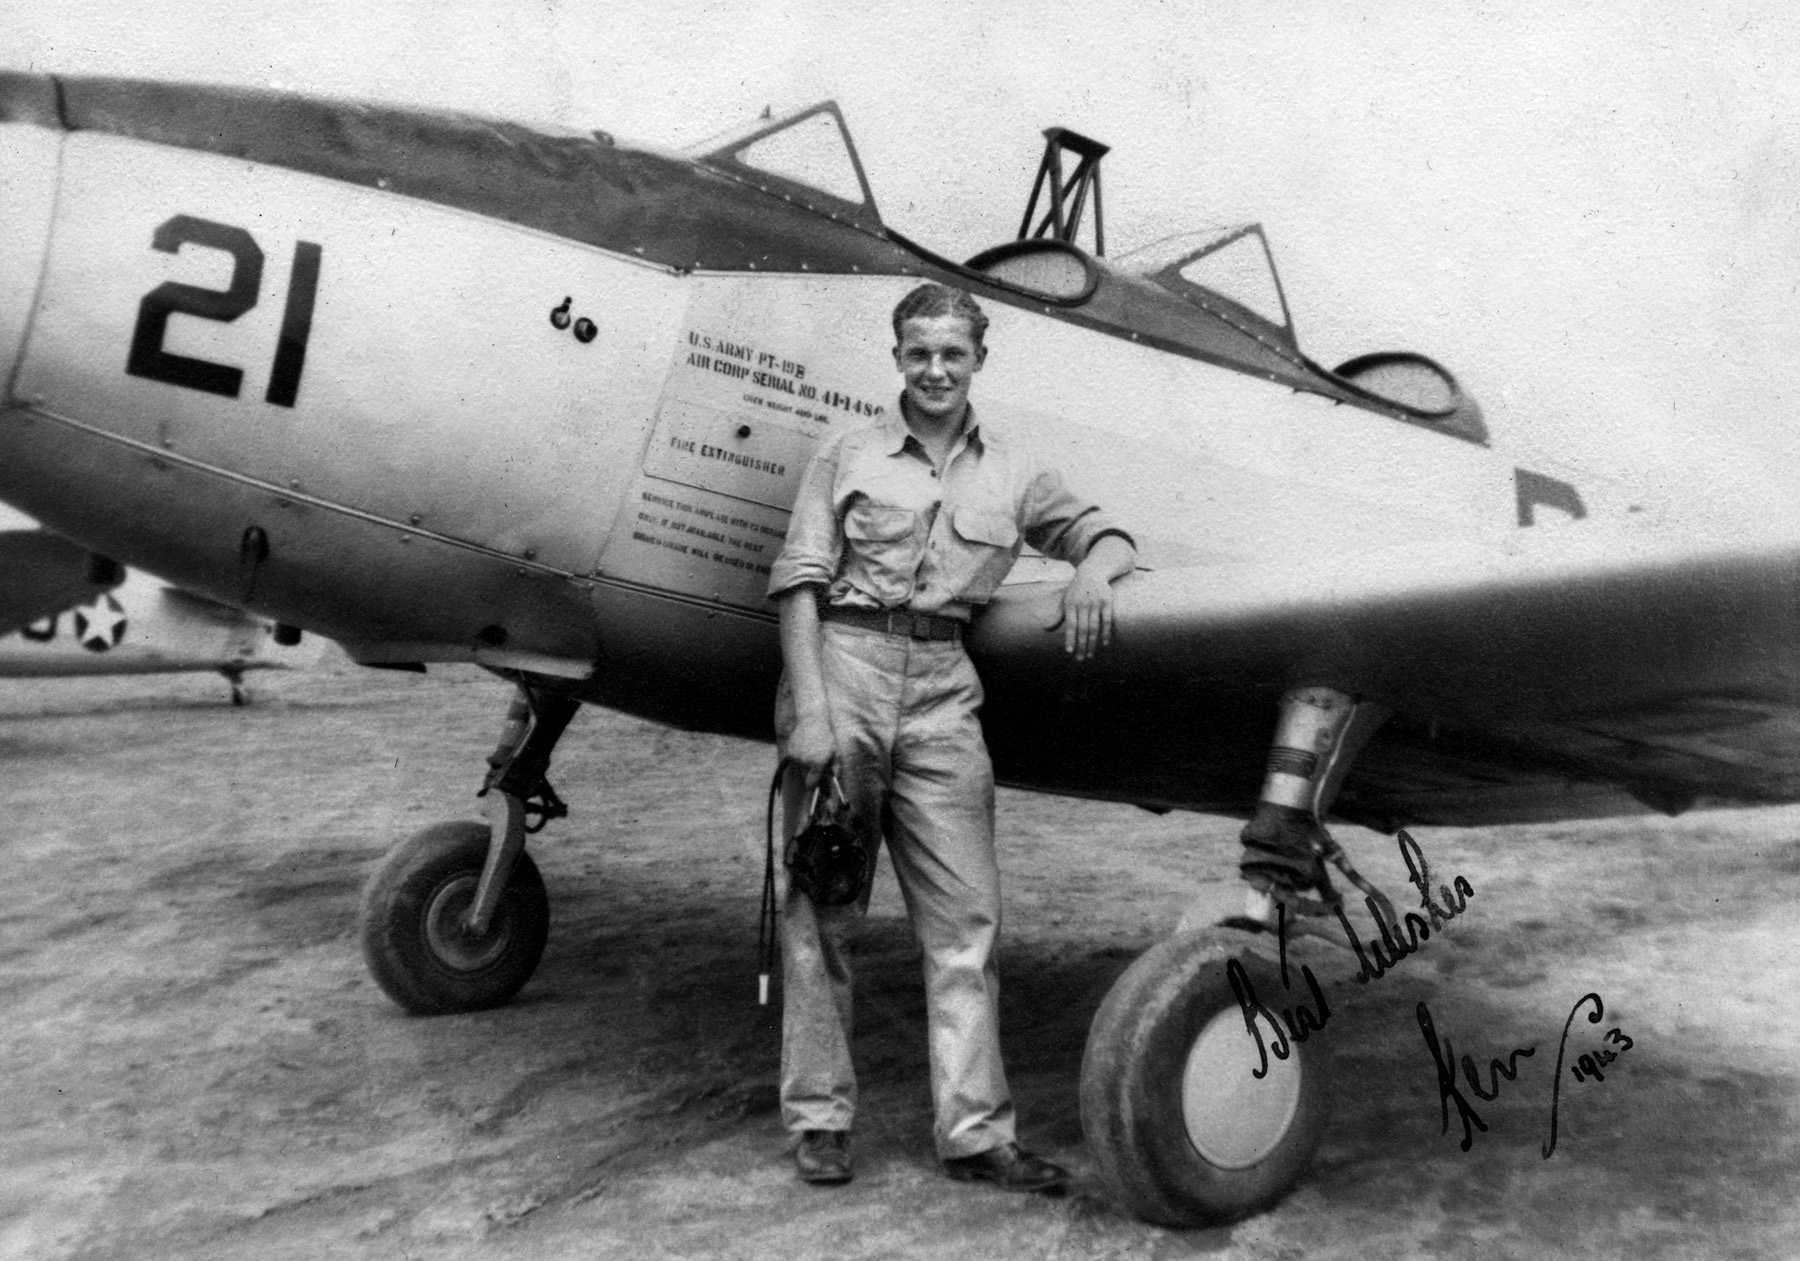  An unidentified pilot stands in front of a PT-19, one of the most popular primary trainers of the war, and the type which Ed Cottrell flew at Visalia, California. 